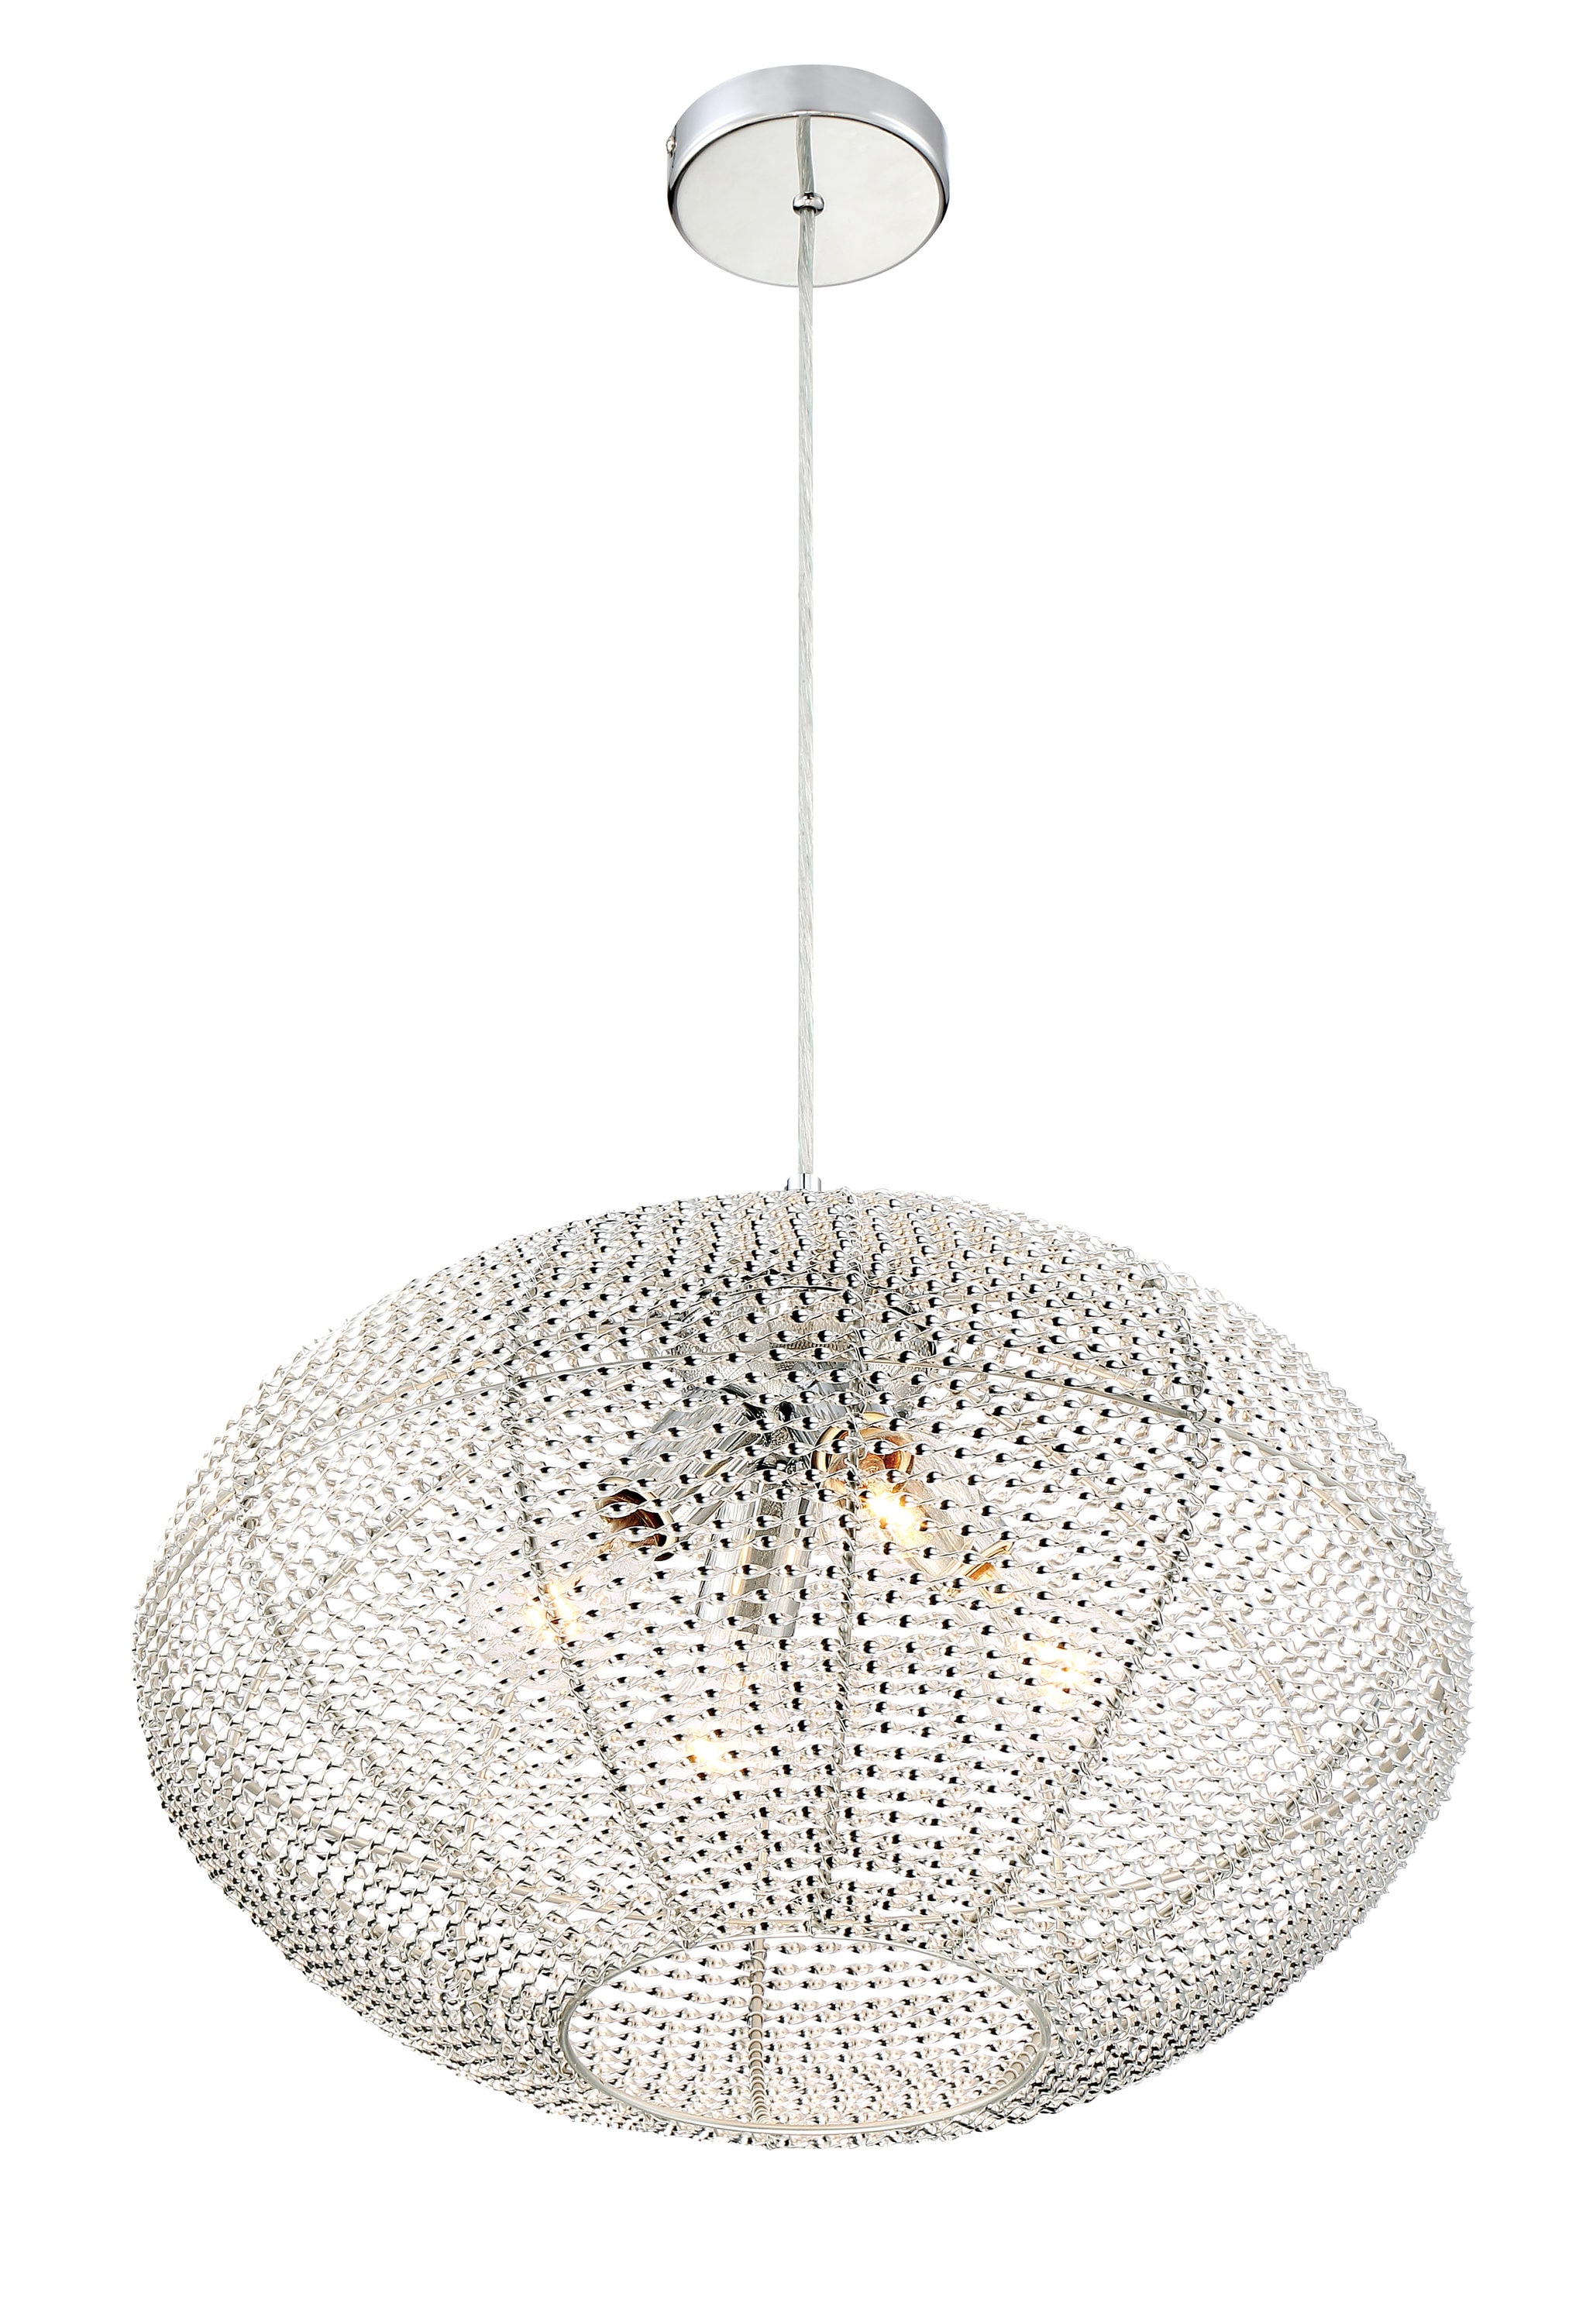 Quoizel Tango 4-Light Polished Chrome the Lighting Dome Light at department Pendant Pendant in Transitional Hanging